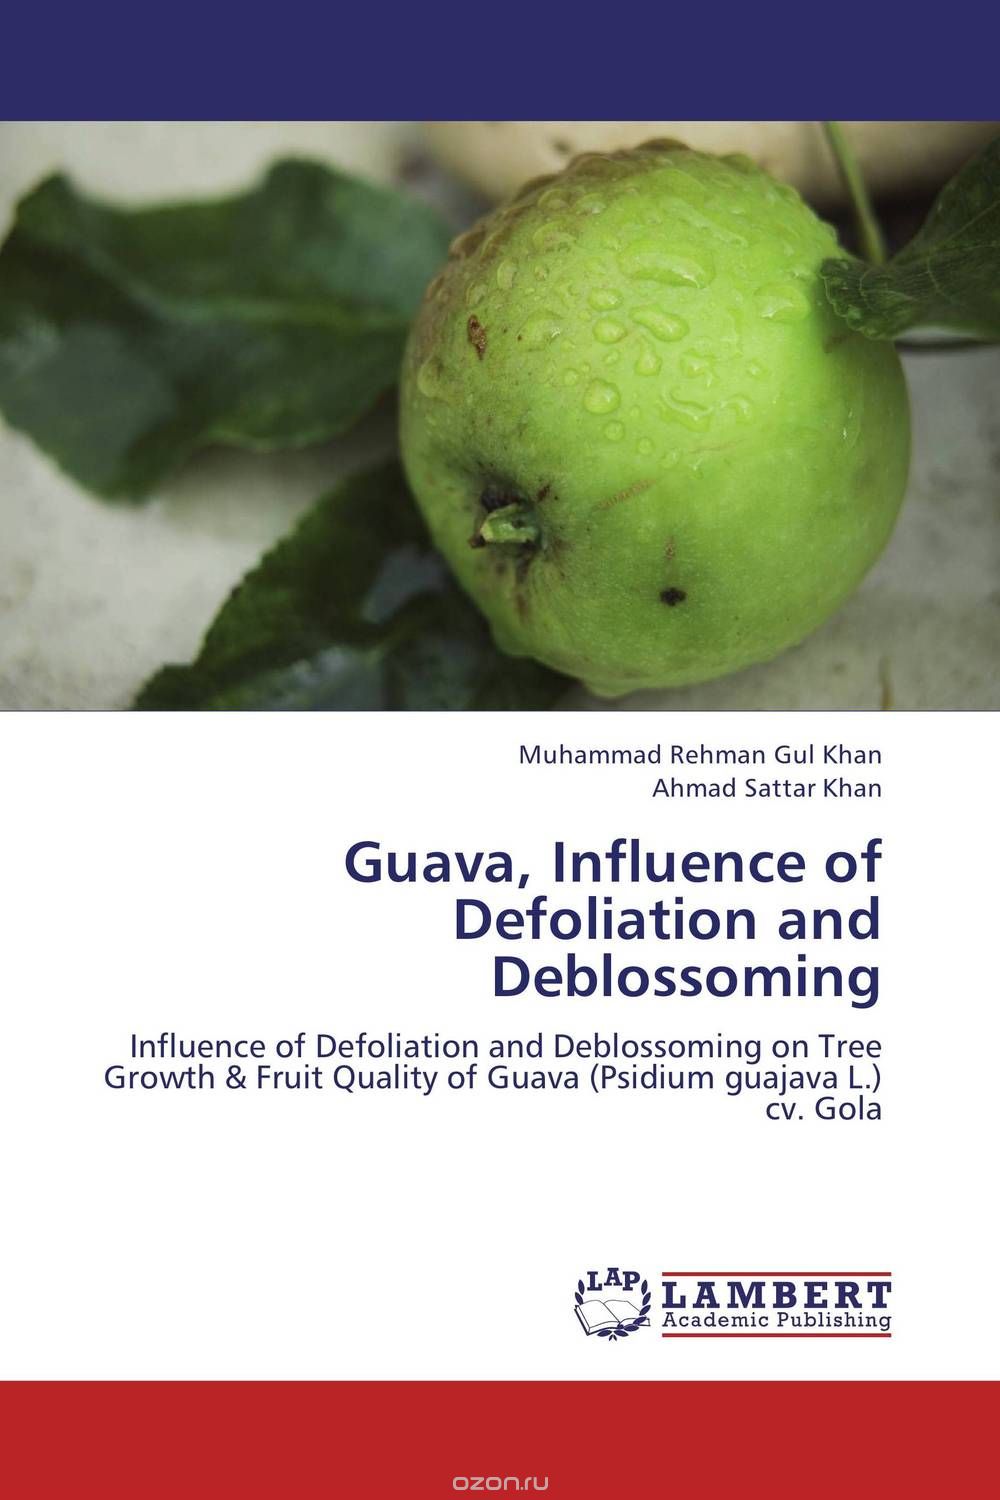 Guava, Influence of Defoliation and Deblossoming